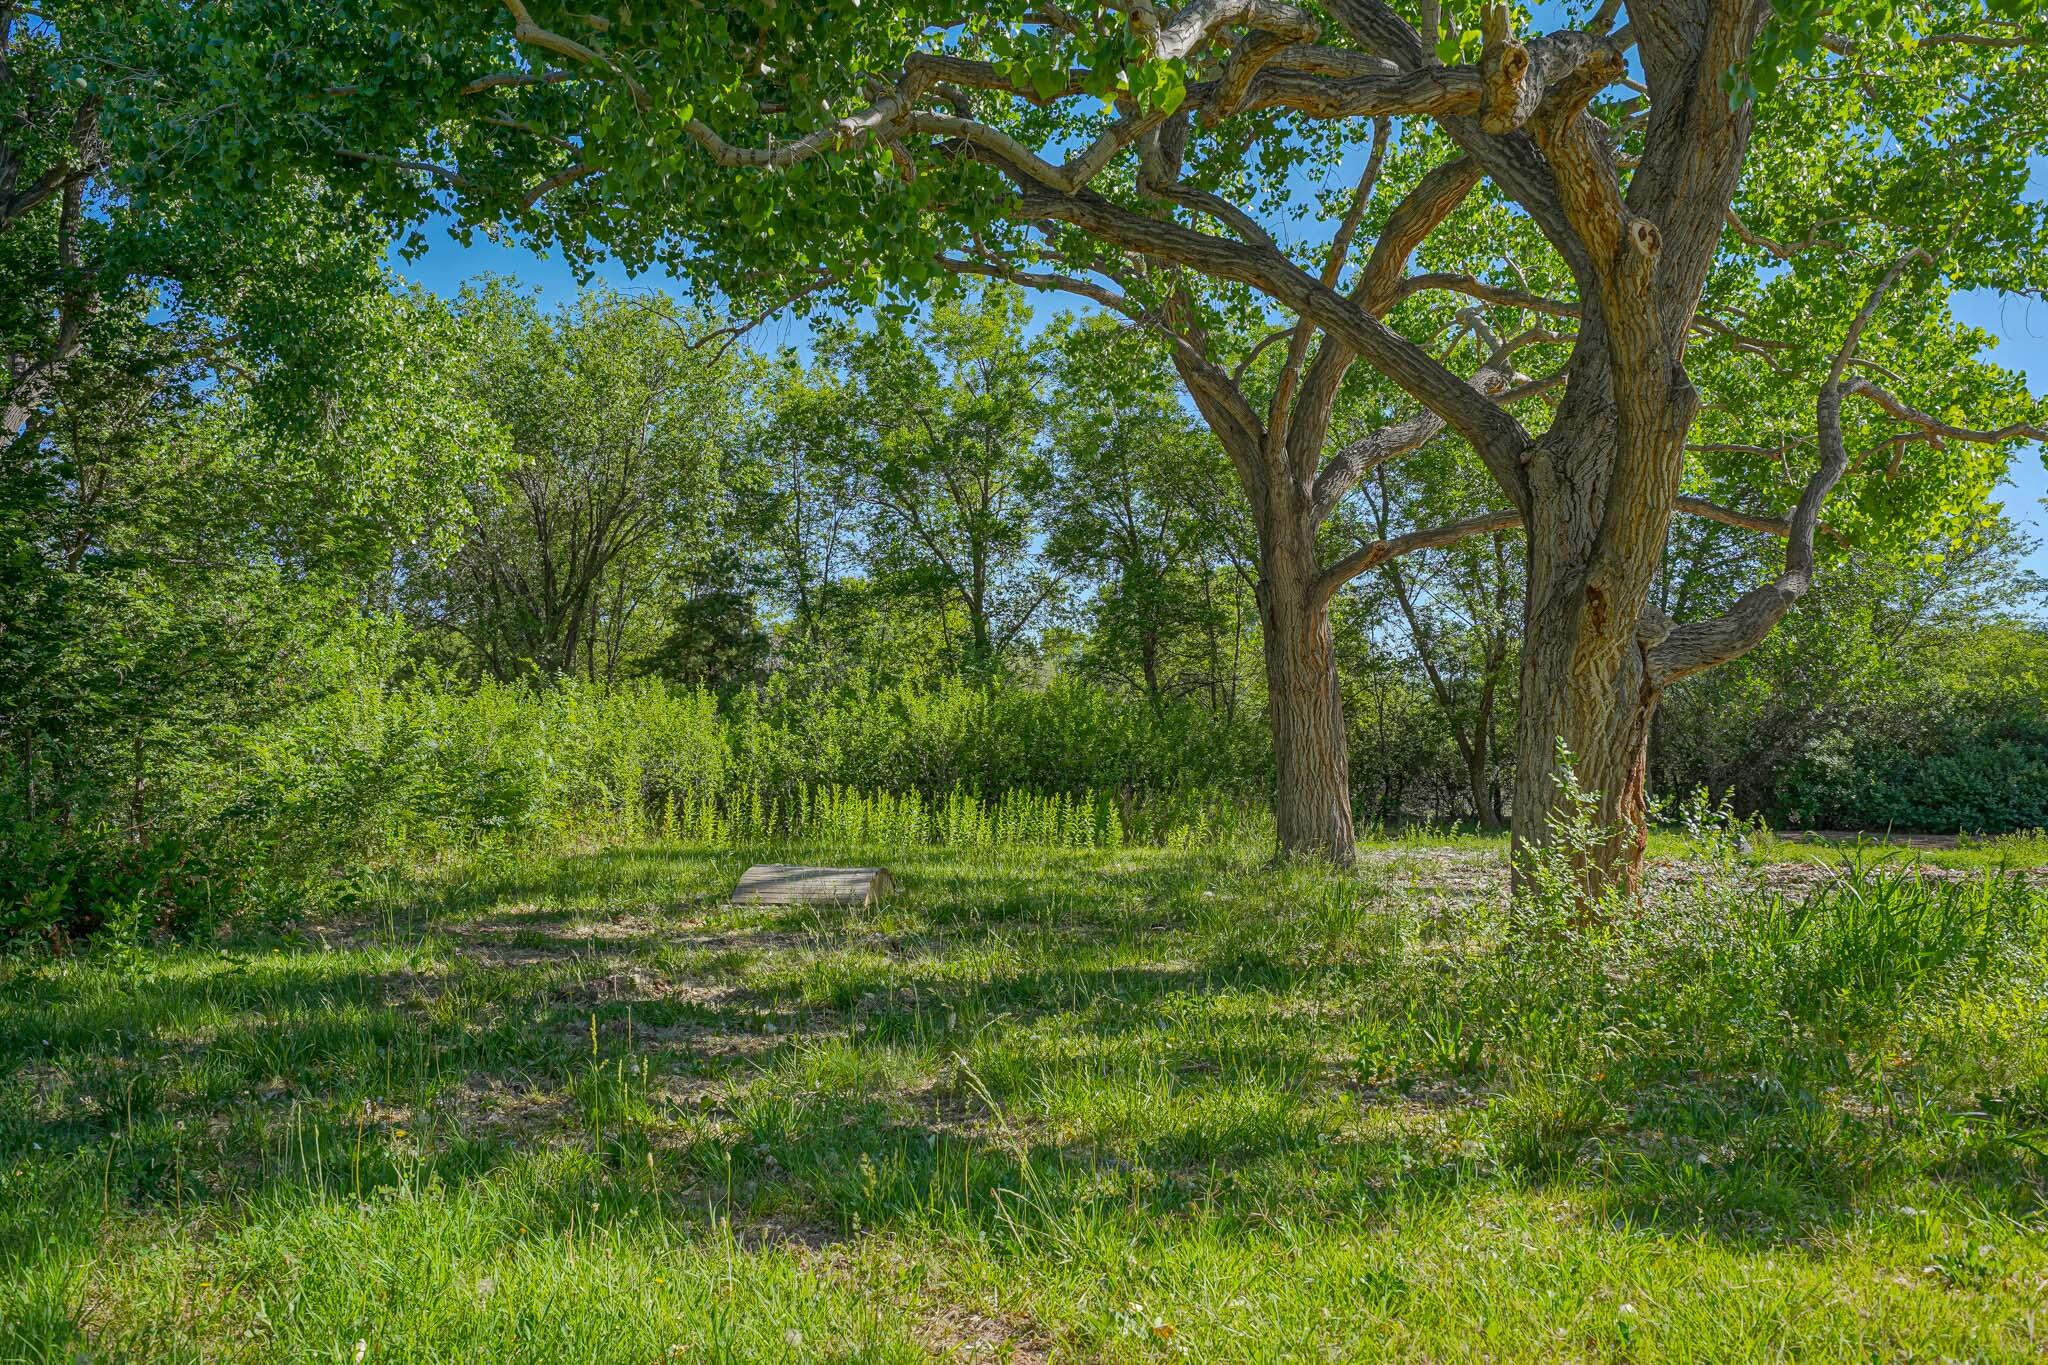 Rare opportunity to build your dream home in THE HEART OF SOUTH CORRALES on a hard to find, level, green, tree laden, 1.08 irrigated acre bordering 5.5 acres of open space. Spectacular winter mountain view with a verdant fruit tree orchard and mature shade trees. On a paved road near the mid irrigation acequia with access to many miles of trails. The iconic Corrales Library, Village Pizza, Ex Novo, Hannah & Nate's, Quaint Shops and services close by. The Sand Hill Cranes winter on the property. Zoned for horses, chickens, and other farm animals. Electricity on property; natural gas in street; a vacated well may possibly be rejuvenated per a recent well inspectors opinion. The Village of Corrales is the ''Horse Capital of New Mexico'' and safest city in NM and ''In Town Country.''